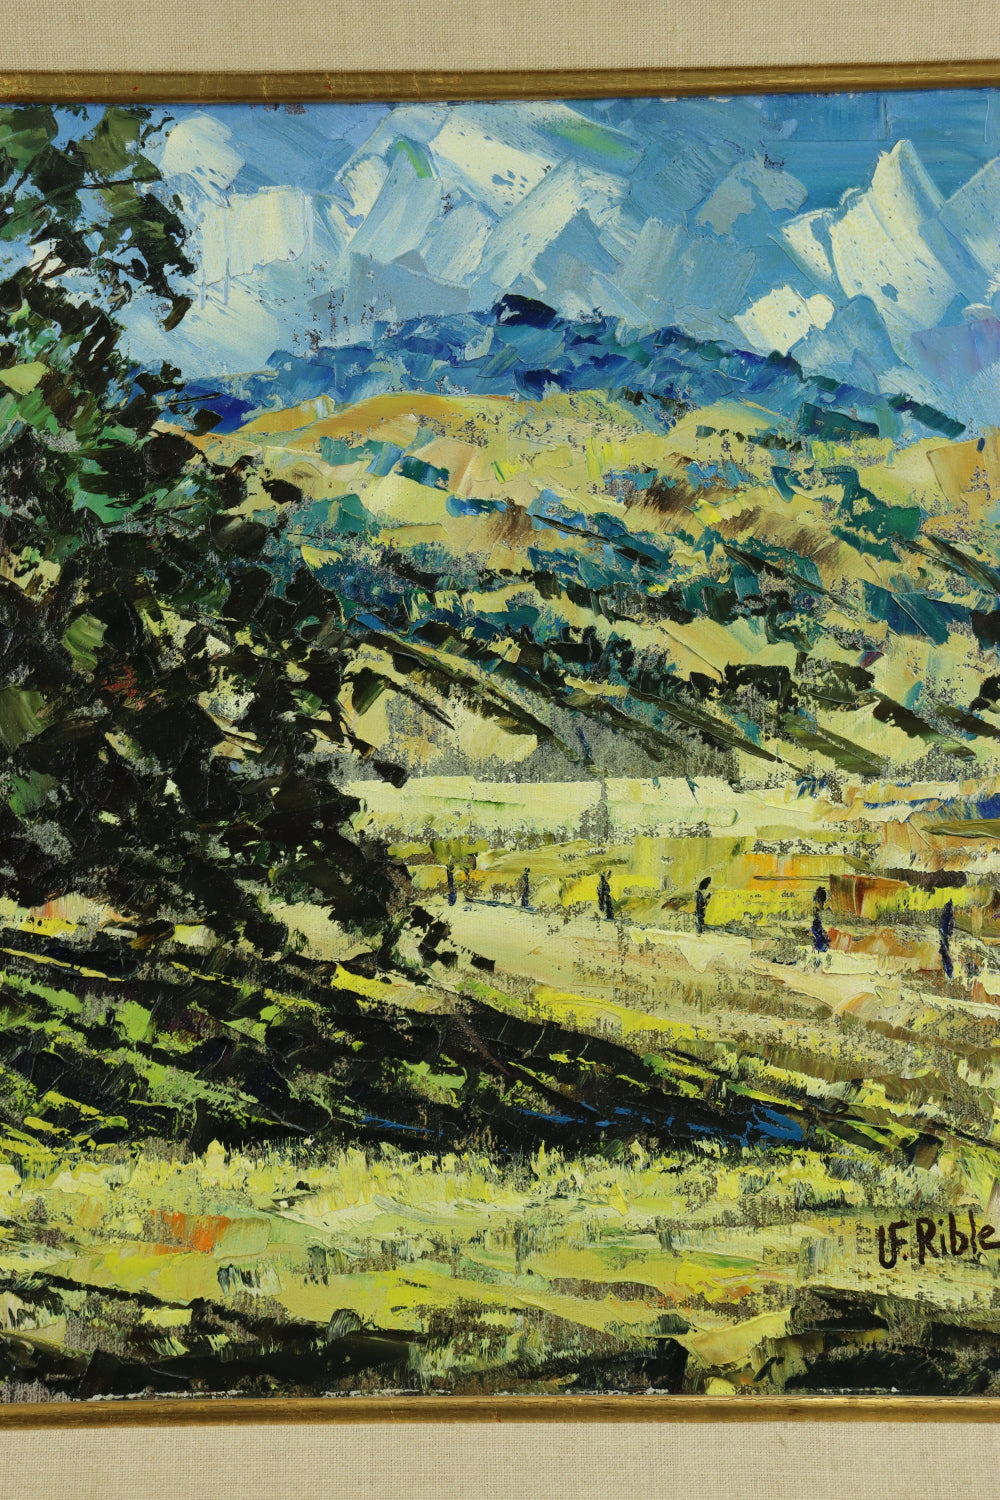 AW403 - Ulysses Floyd Rible - A Morning in Spring - Oil on Canvas